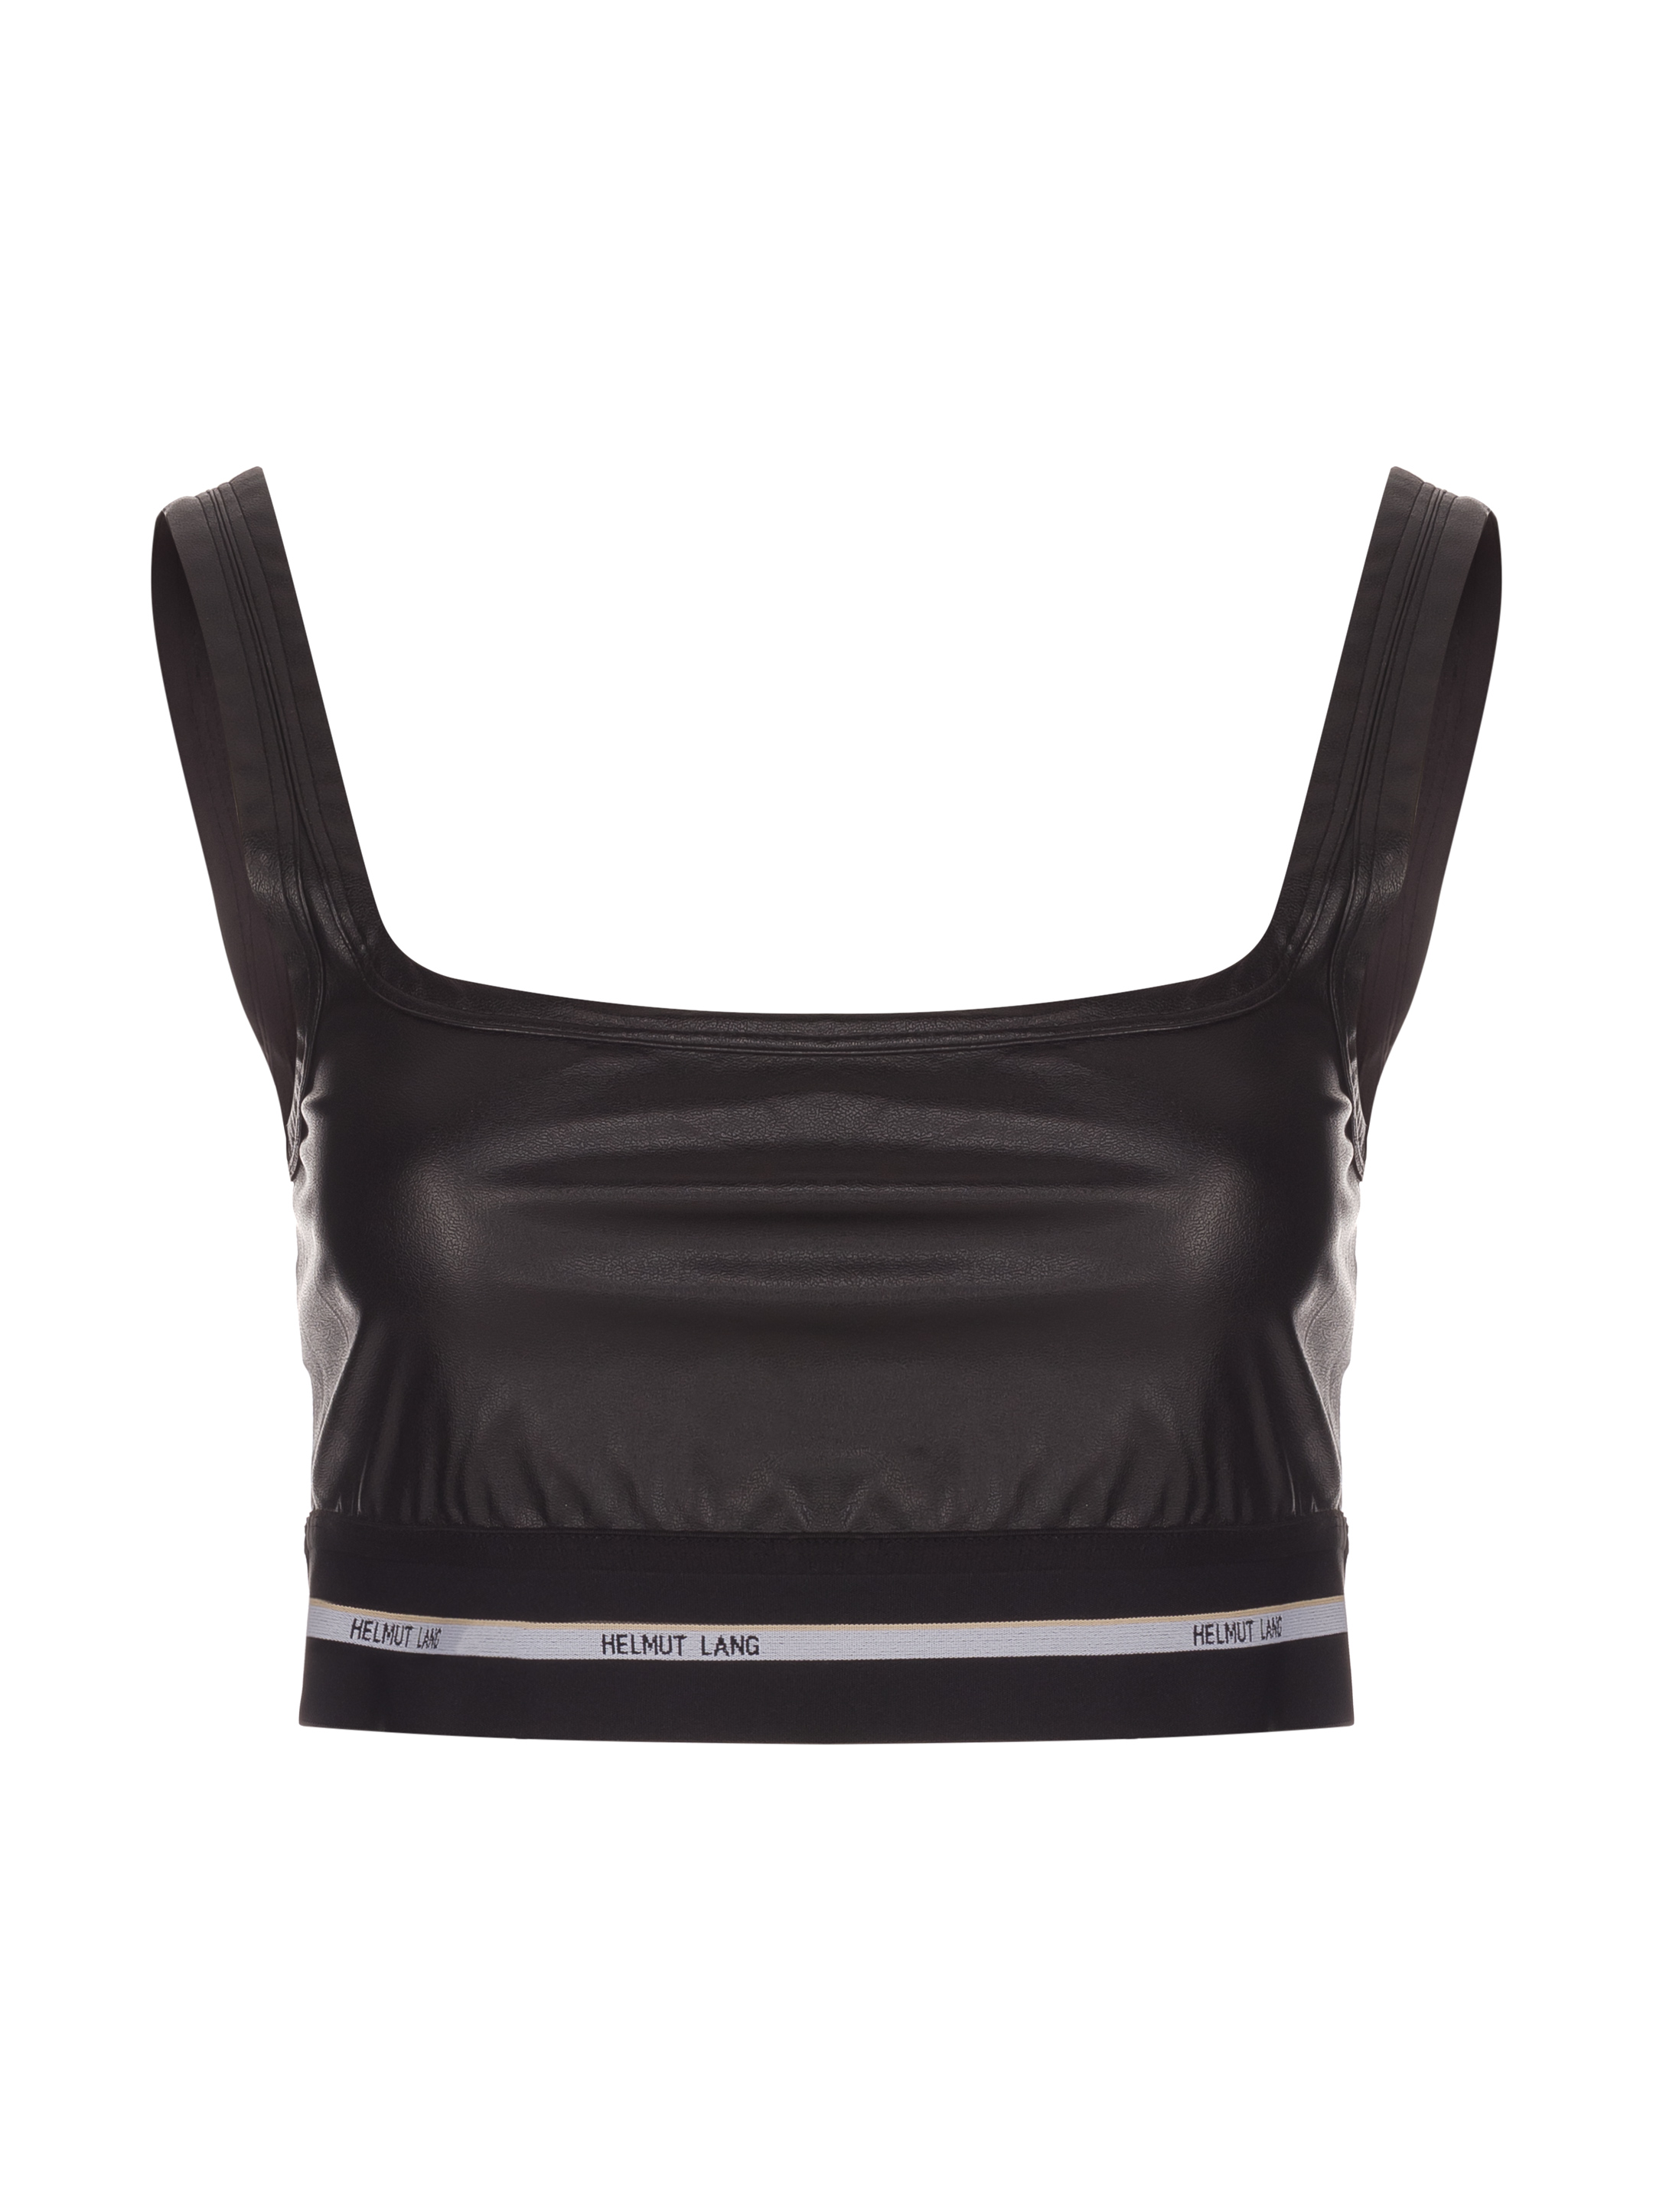 Helmut Lang women's Eco-leather bra - buy for 174600 KZT in the